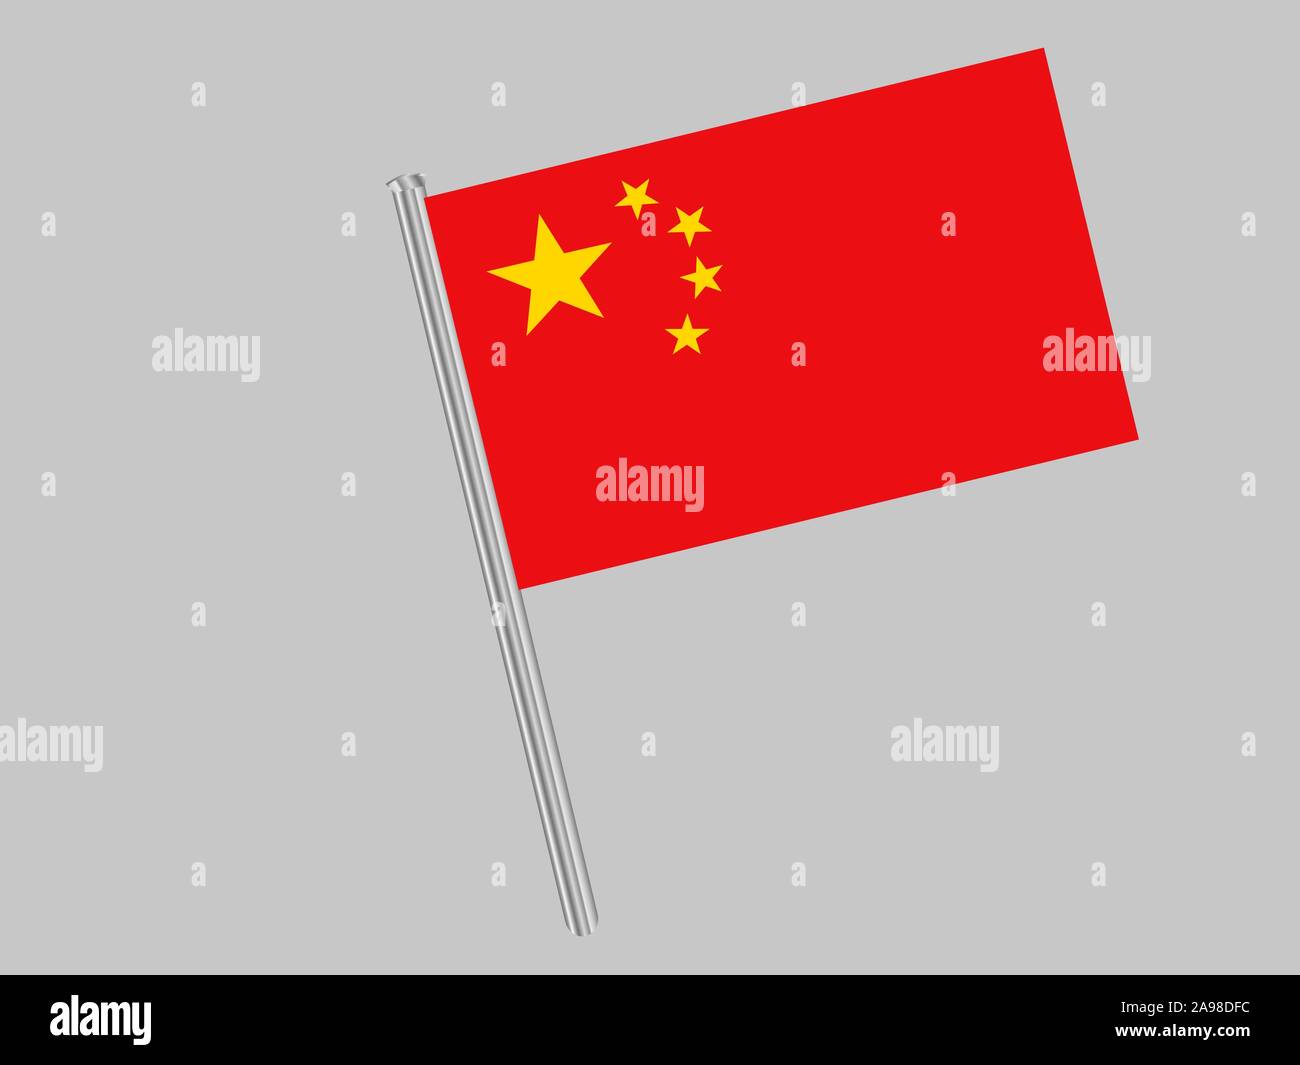 National flag of Peoples Republic of China . original colors and proportion. Simply vector illustration, from countries flag set. Stock Vector